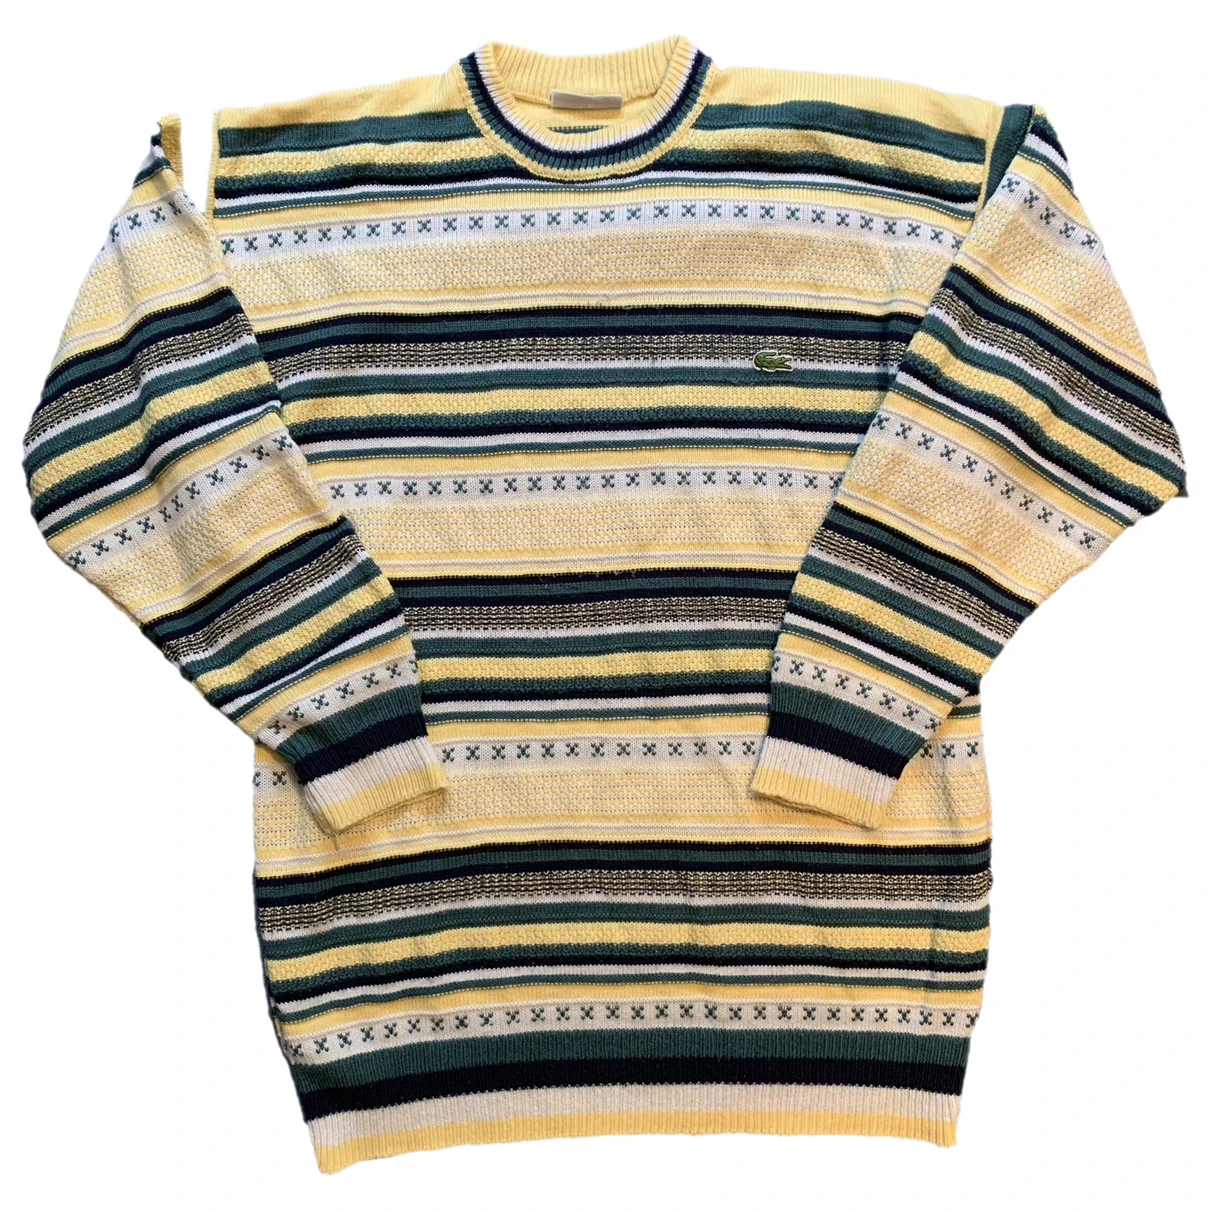 Pre-owned Lacoste Pull In Yellow